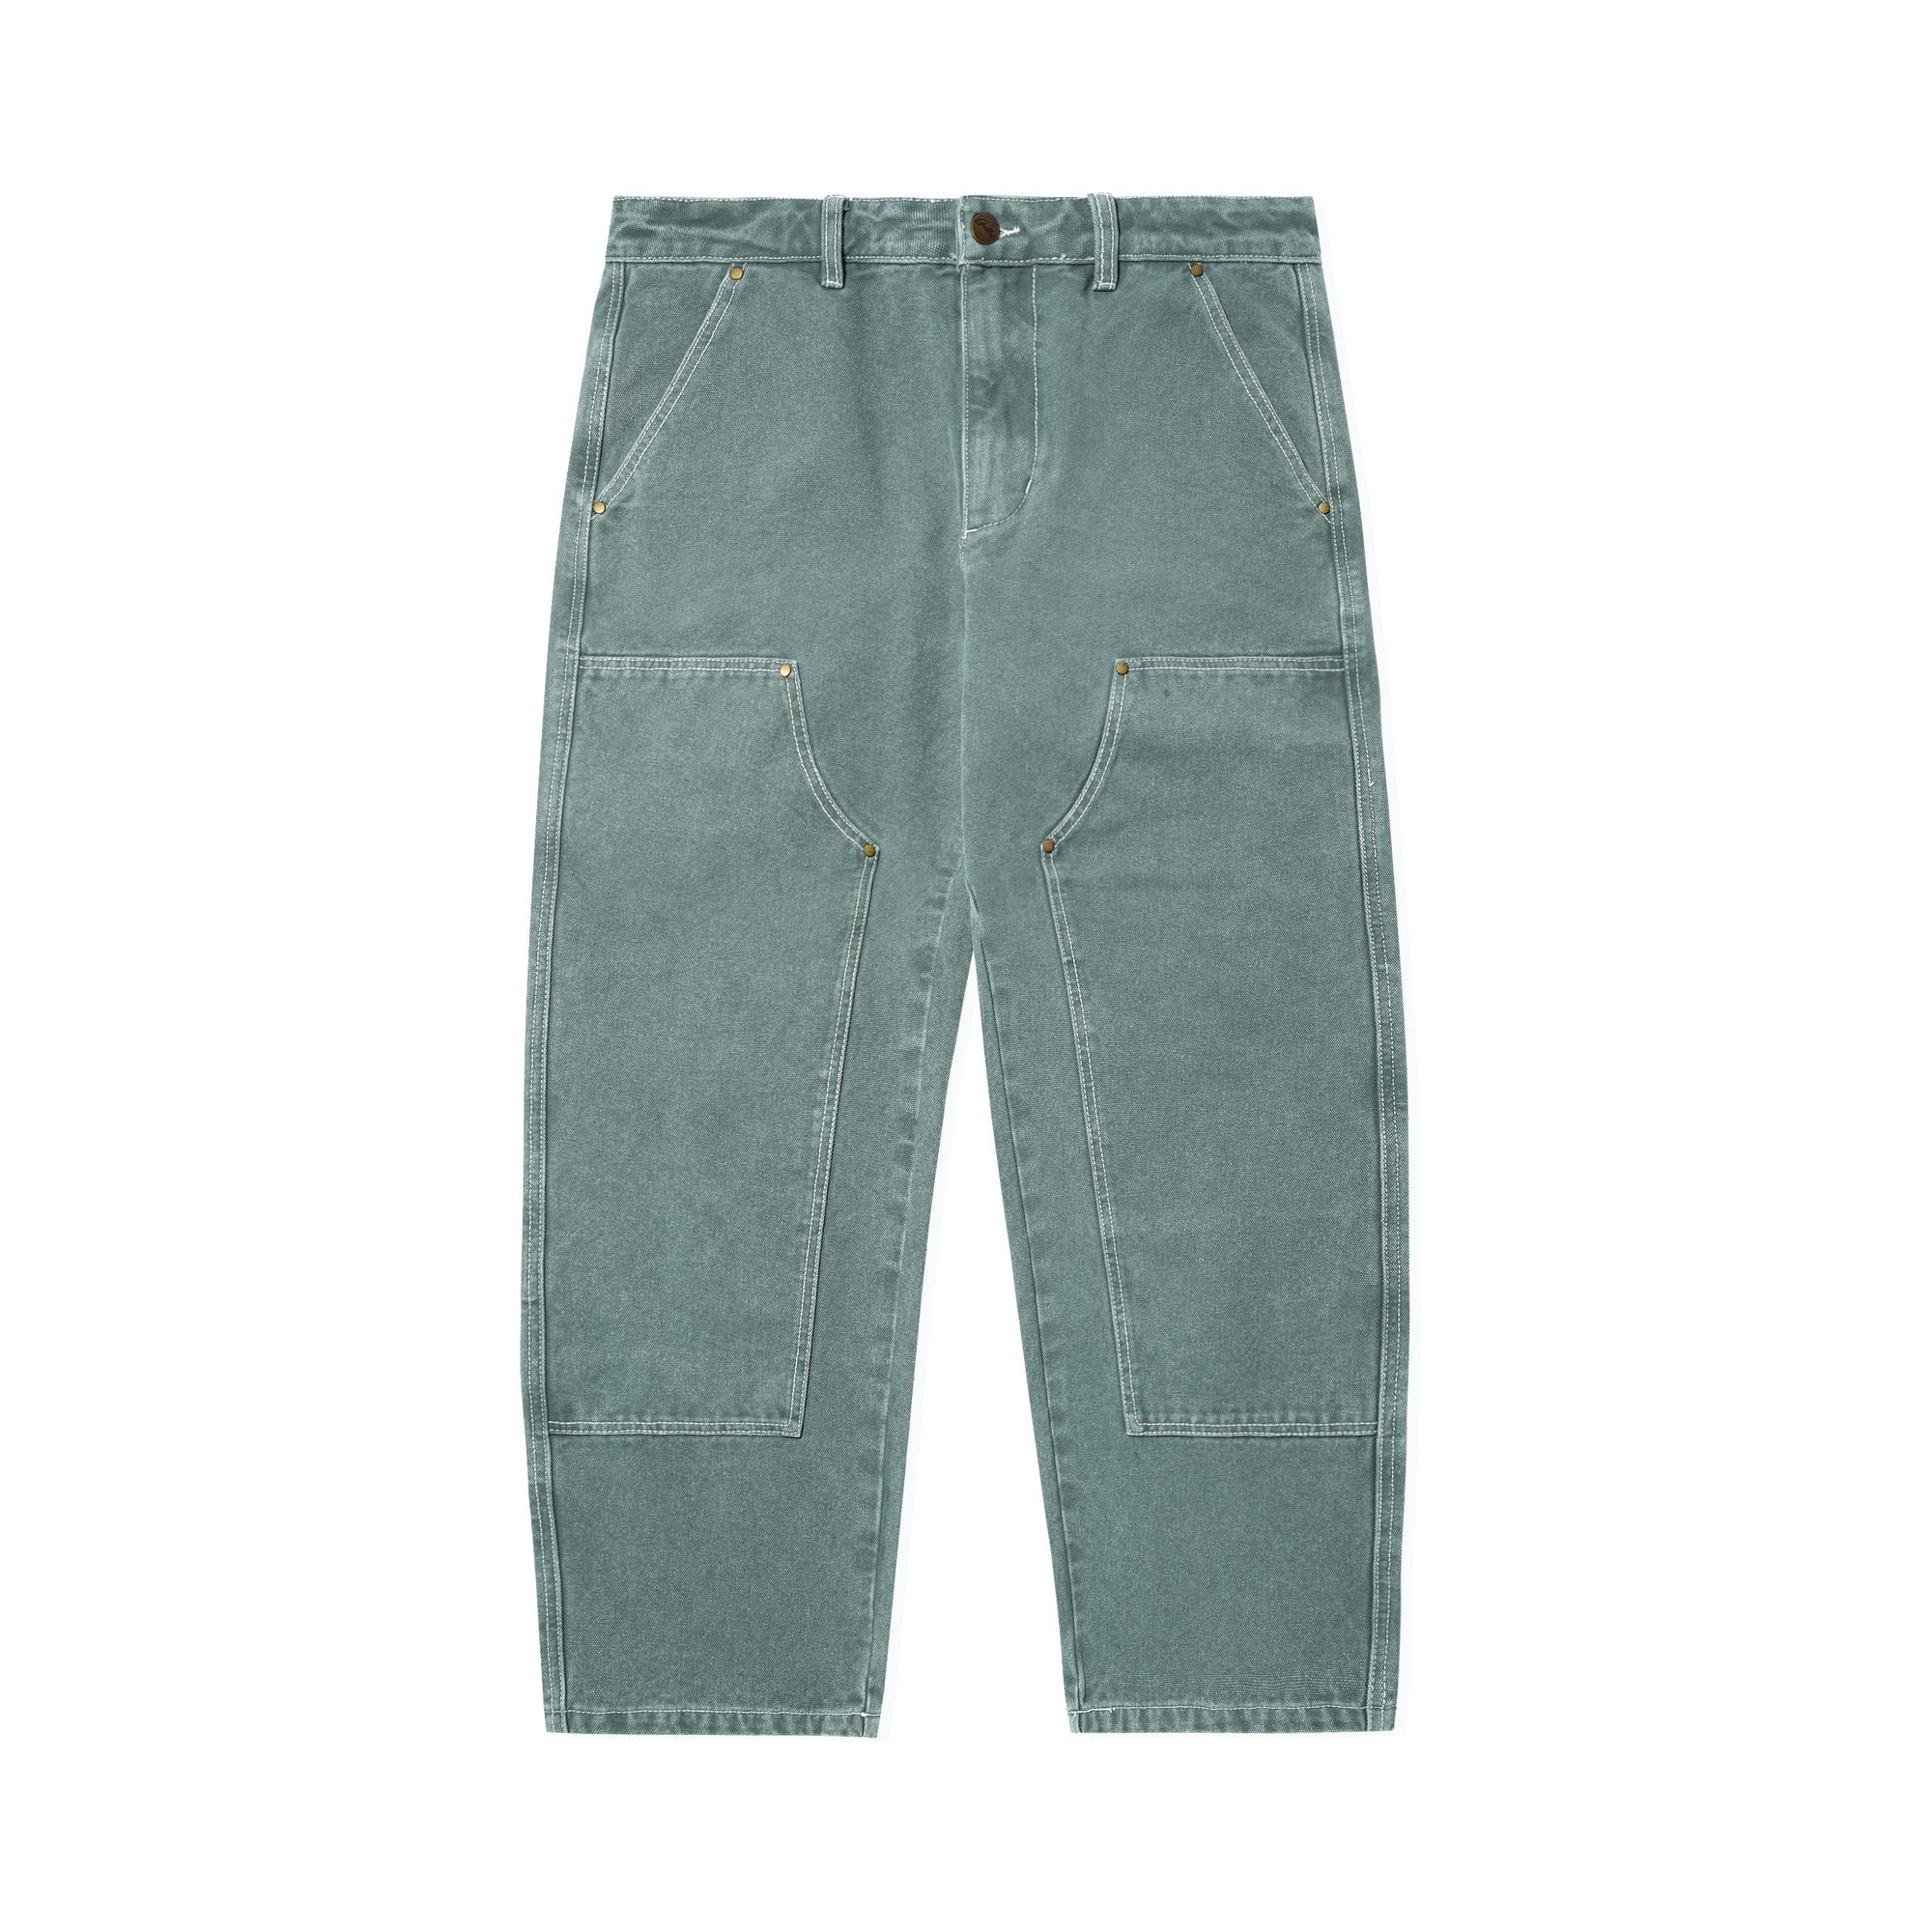 Butter Goods Work Double Knee Pants - Washed Fern